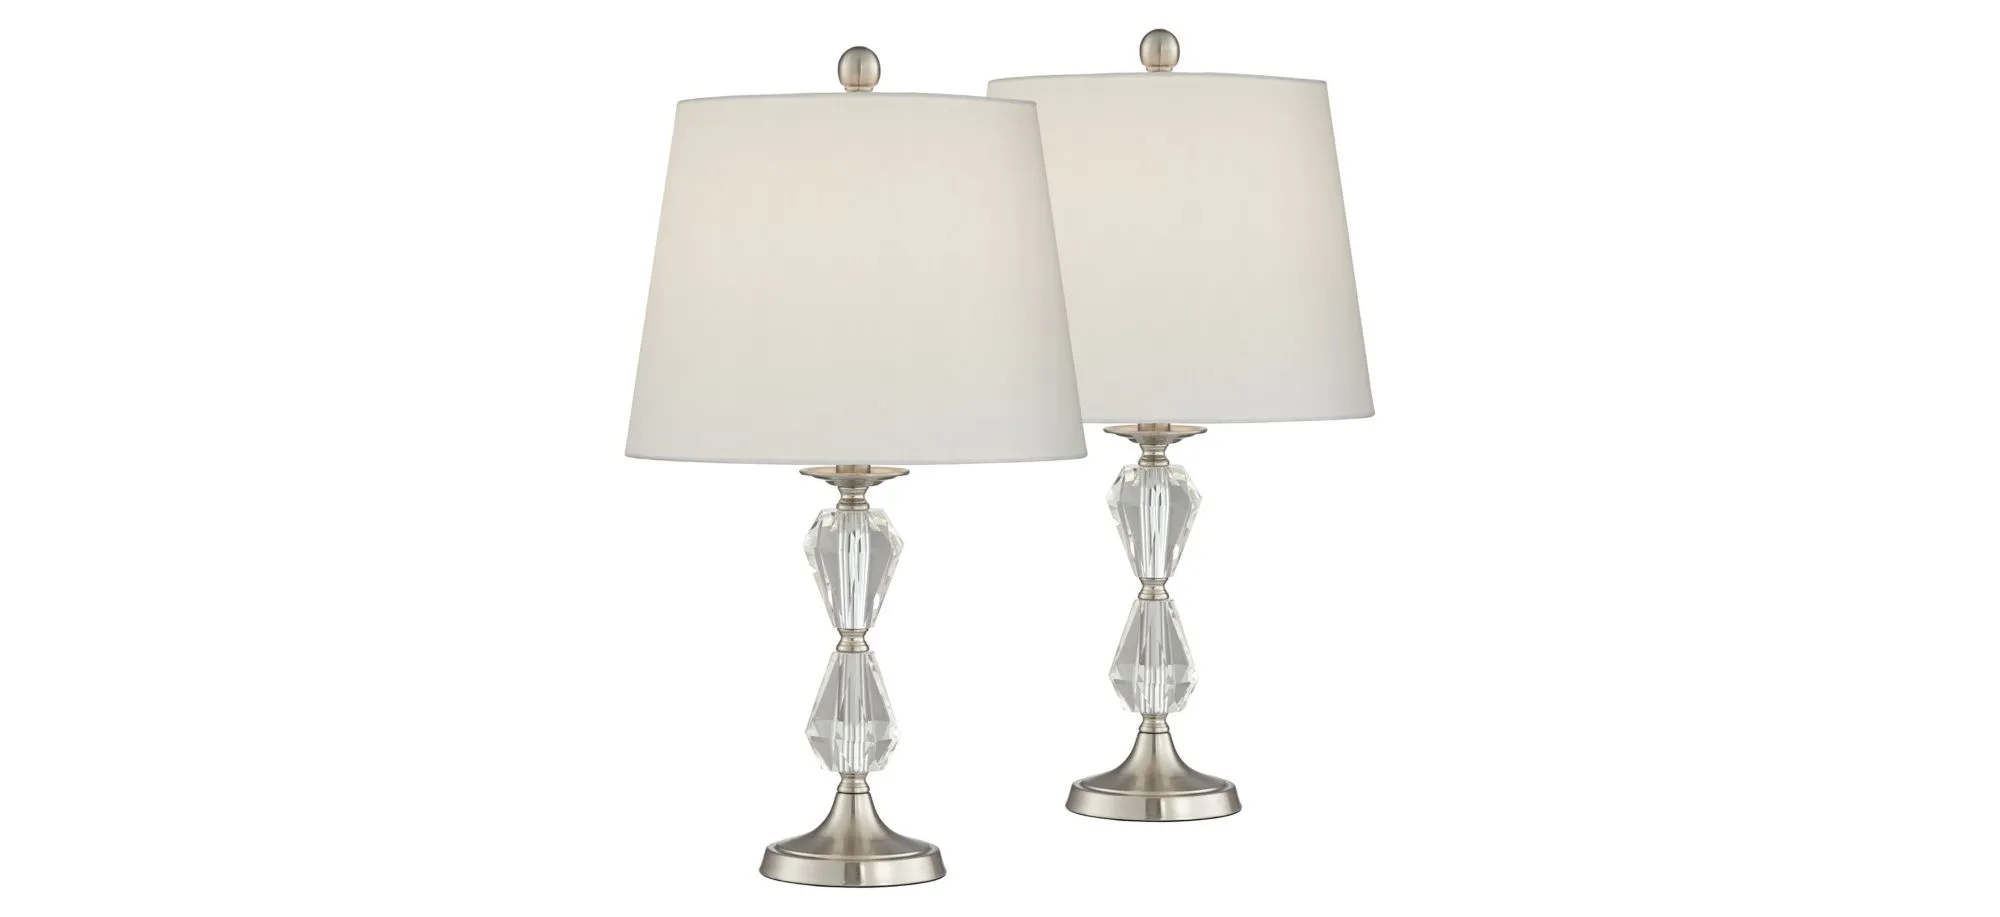 Pacific Coast Crystal Hour Table Lamp- Set of 2 in Brushed Nickel/Brushed Steel by Pacific Coast